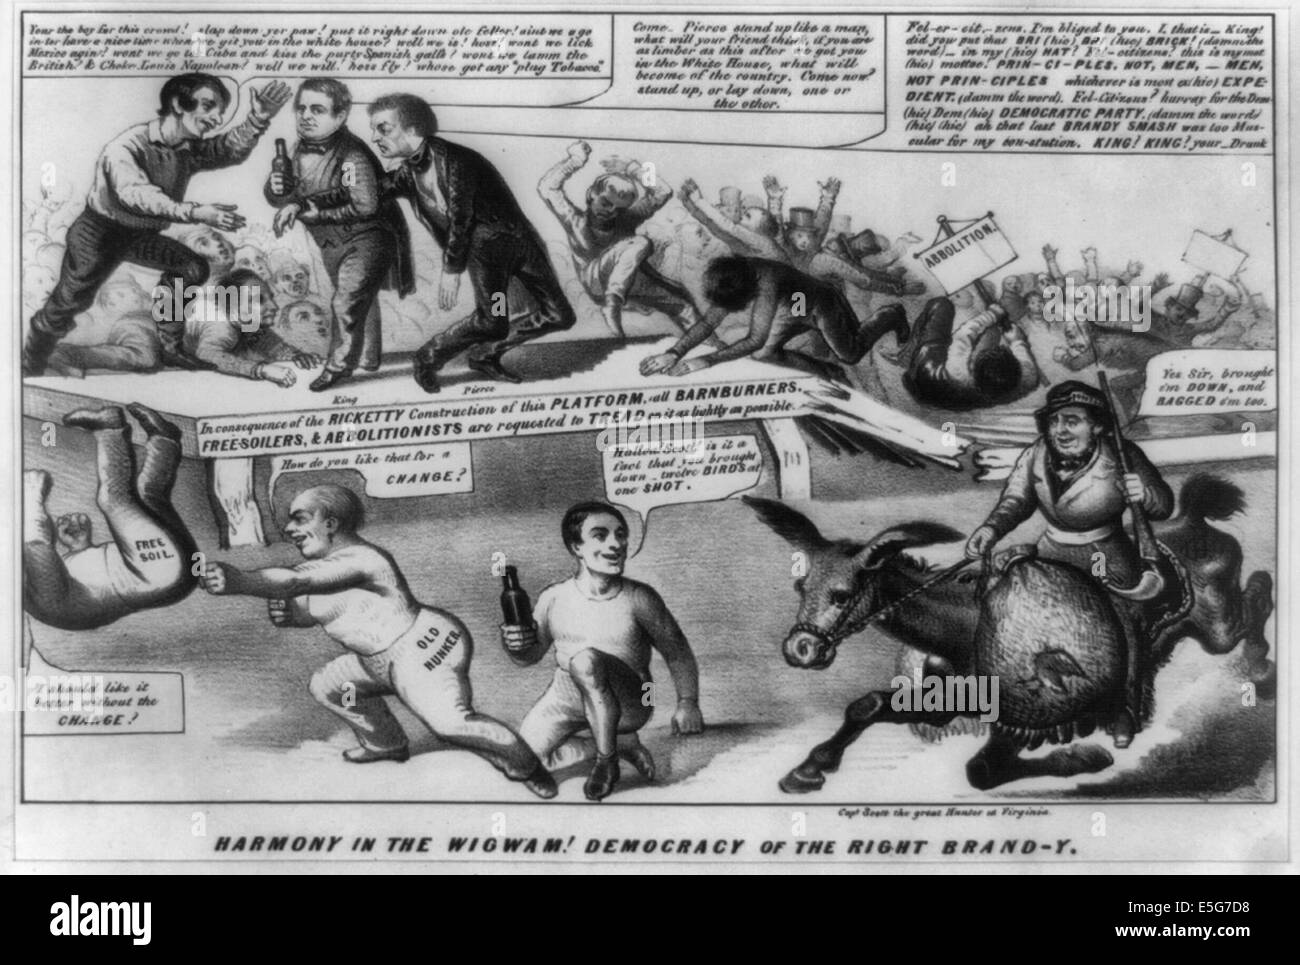 Harmony in the wigwam! Democracy of the right brand-y. A comic scene ridiculing the Tammany Democrats of New York City. Tammany headquarters, known as the "Wigwam," here erupts in a drunken fracas over the Democratic platform for the presidential race of 1852. Stock Photo